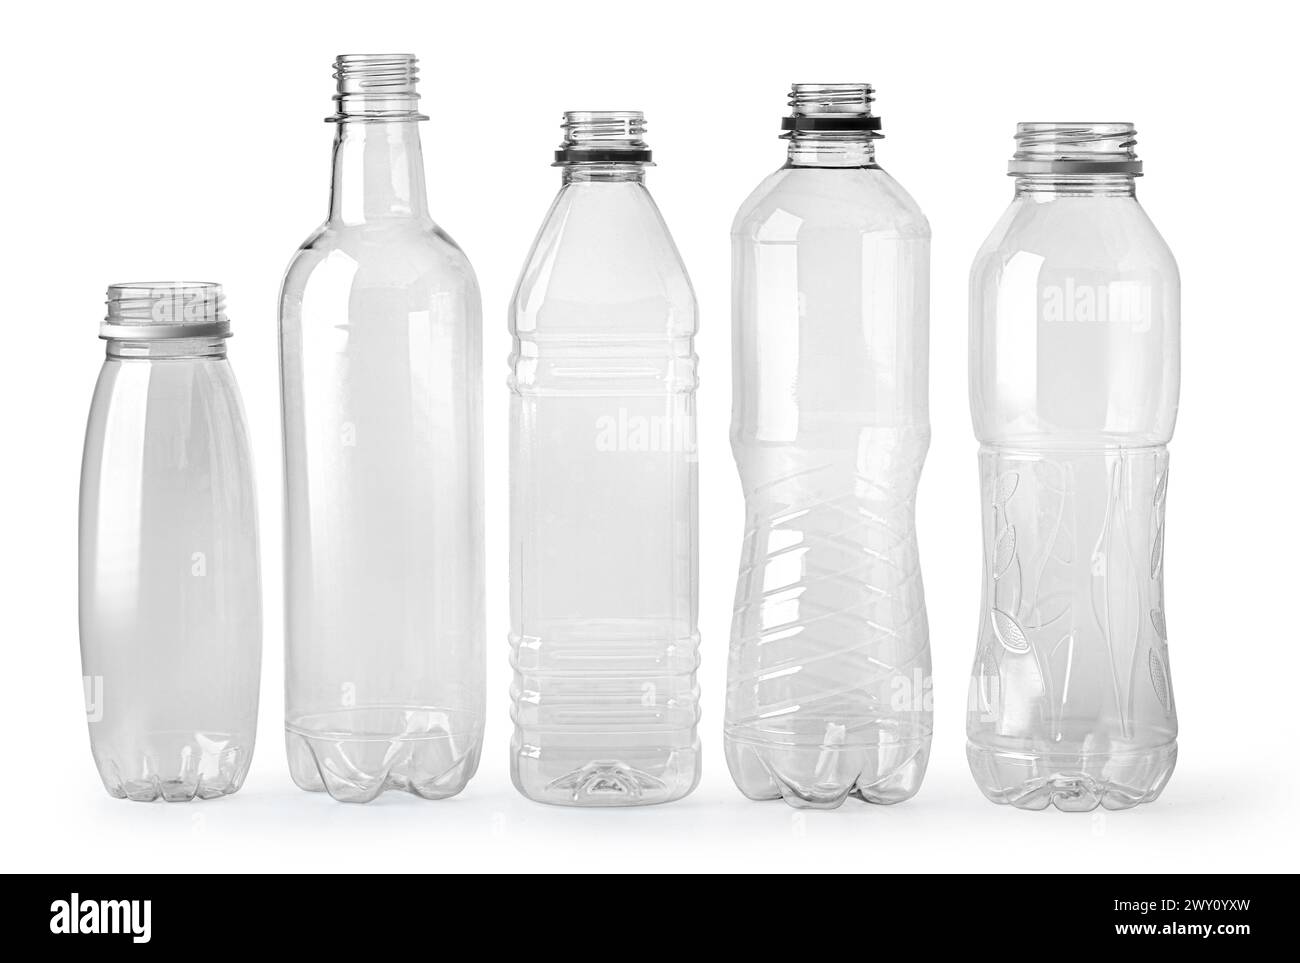 Used plastic bottles on white background with clipping path Stock Photo